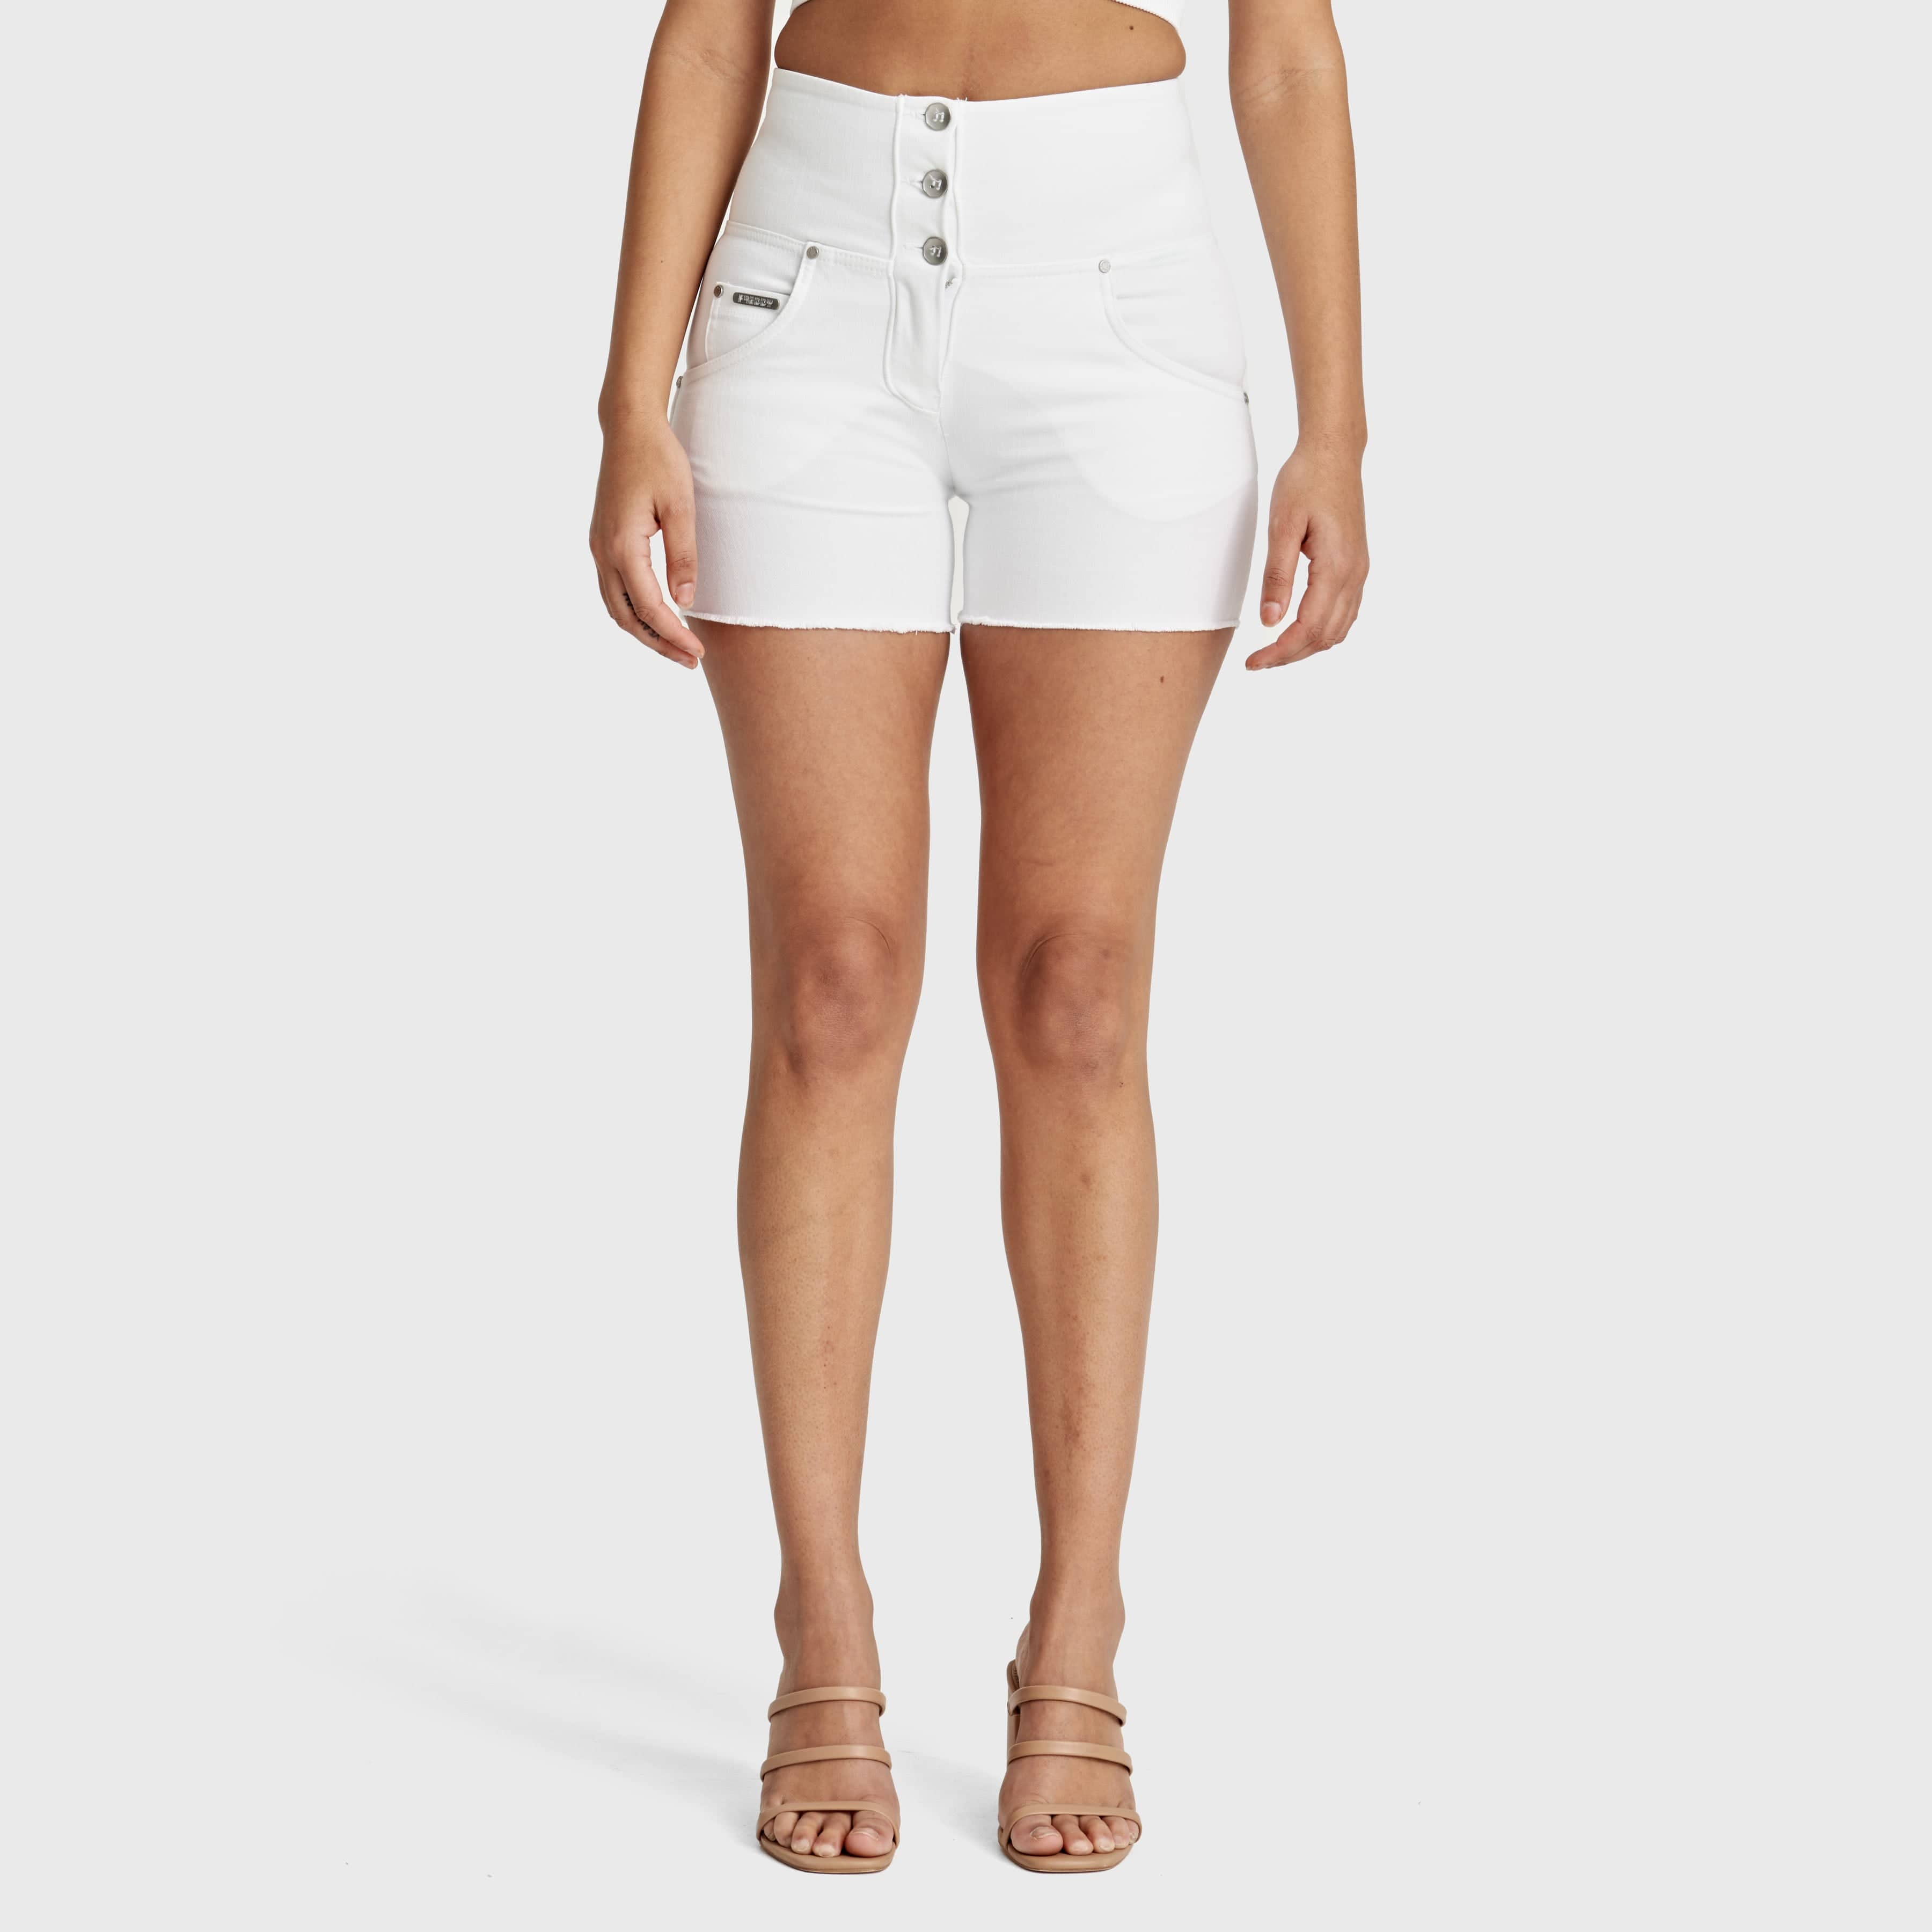 WR.UP® SNUG Jeans - 3 Button High Waisted - Shorts - White 1